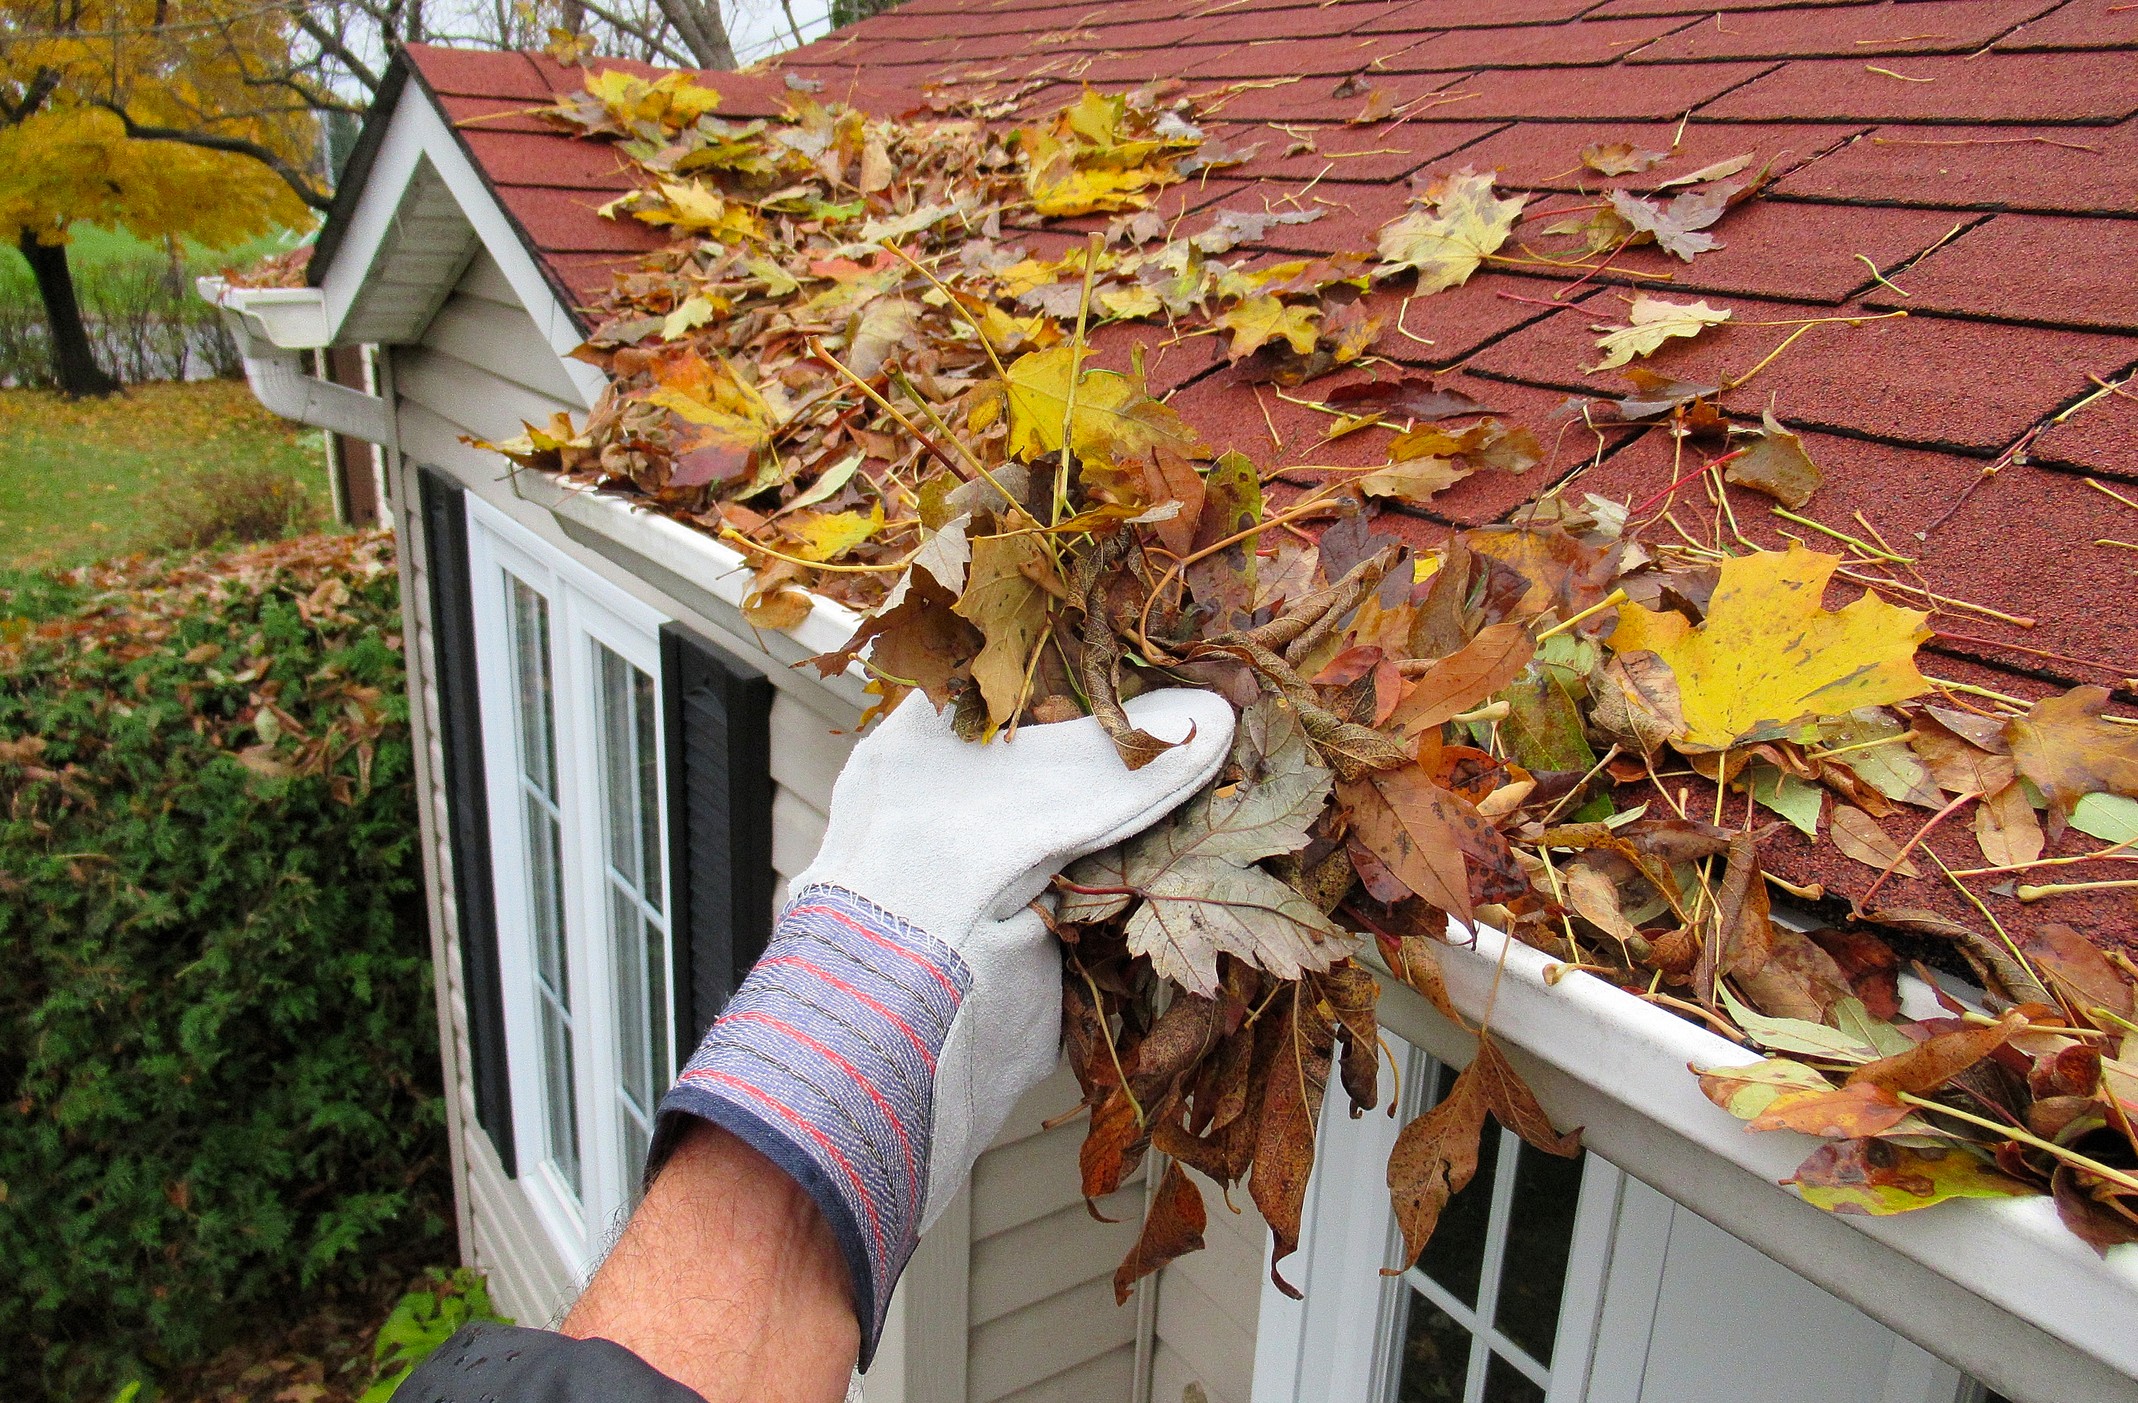 Why Are There So Many Leaves and Debris in the Gutters?